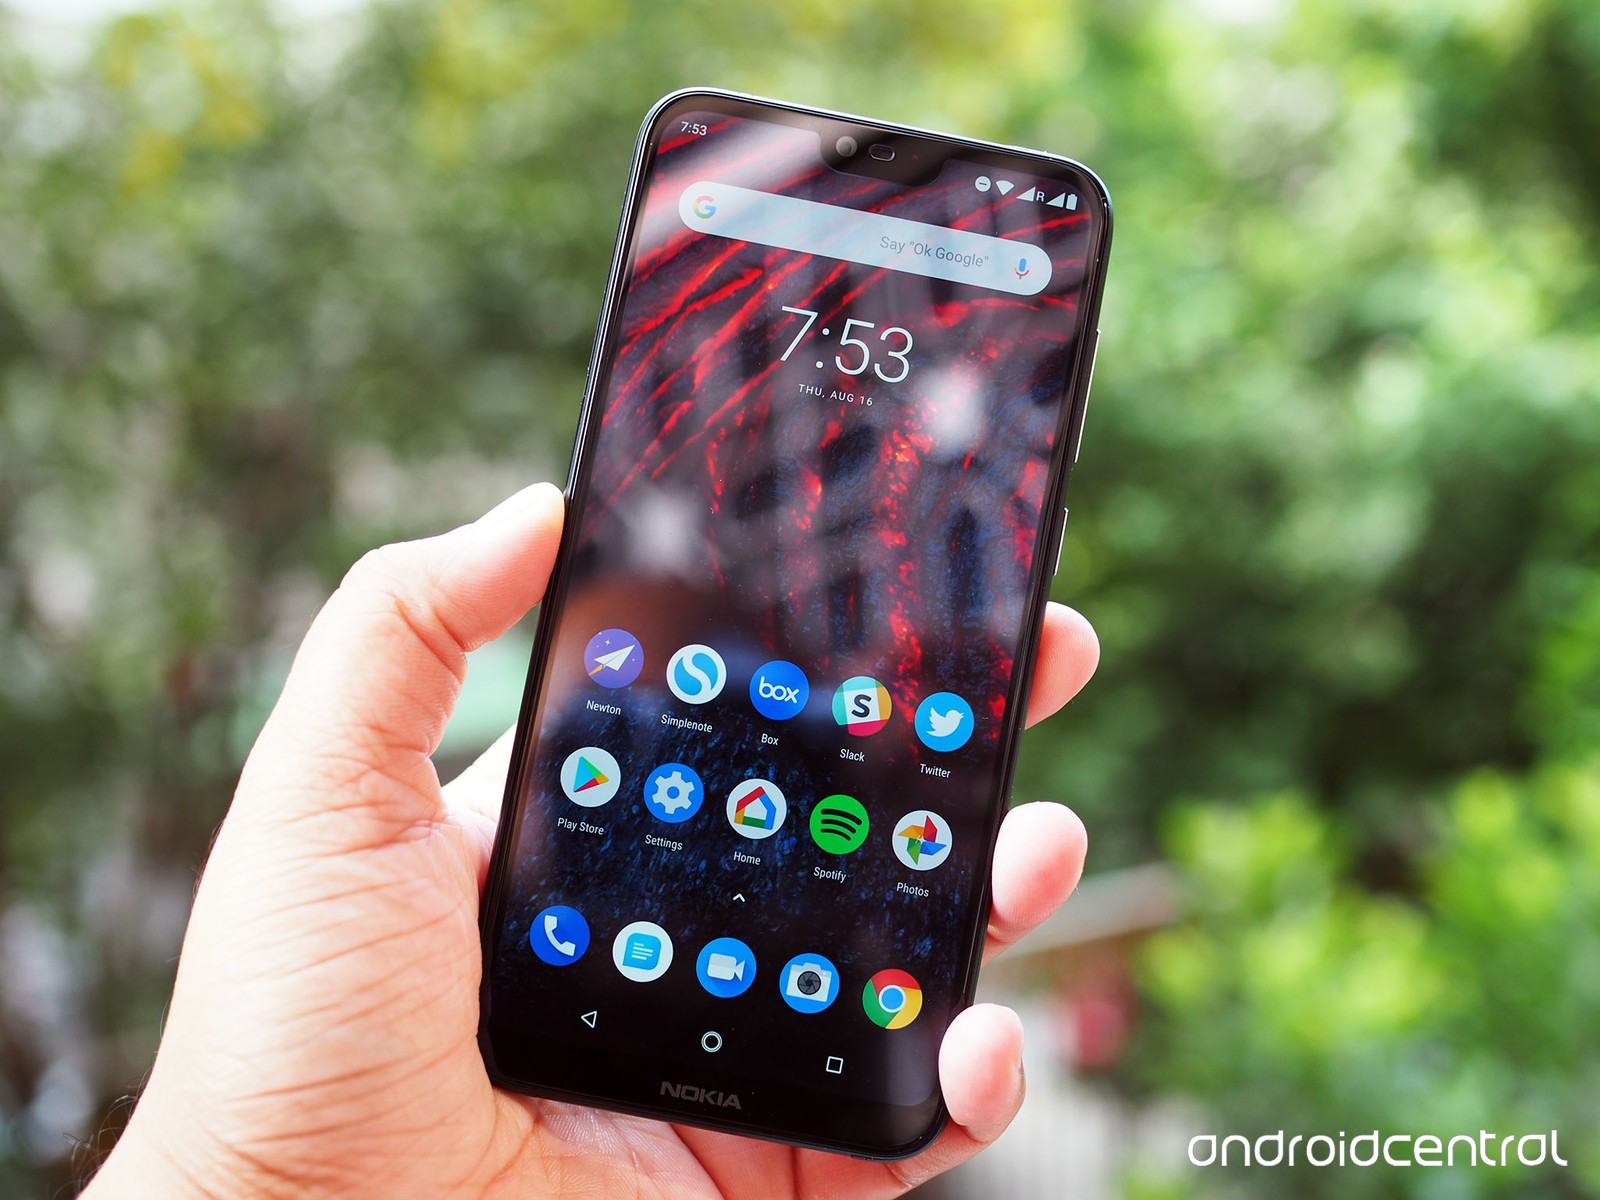 Nokia 6.1 Plus went out-of-stock in just three minutes post its launch on Flipkart